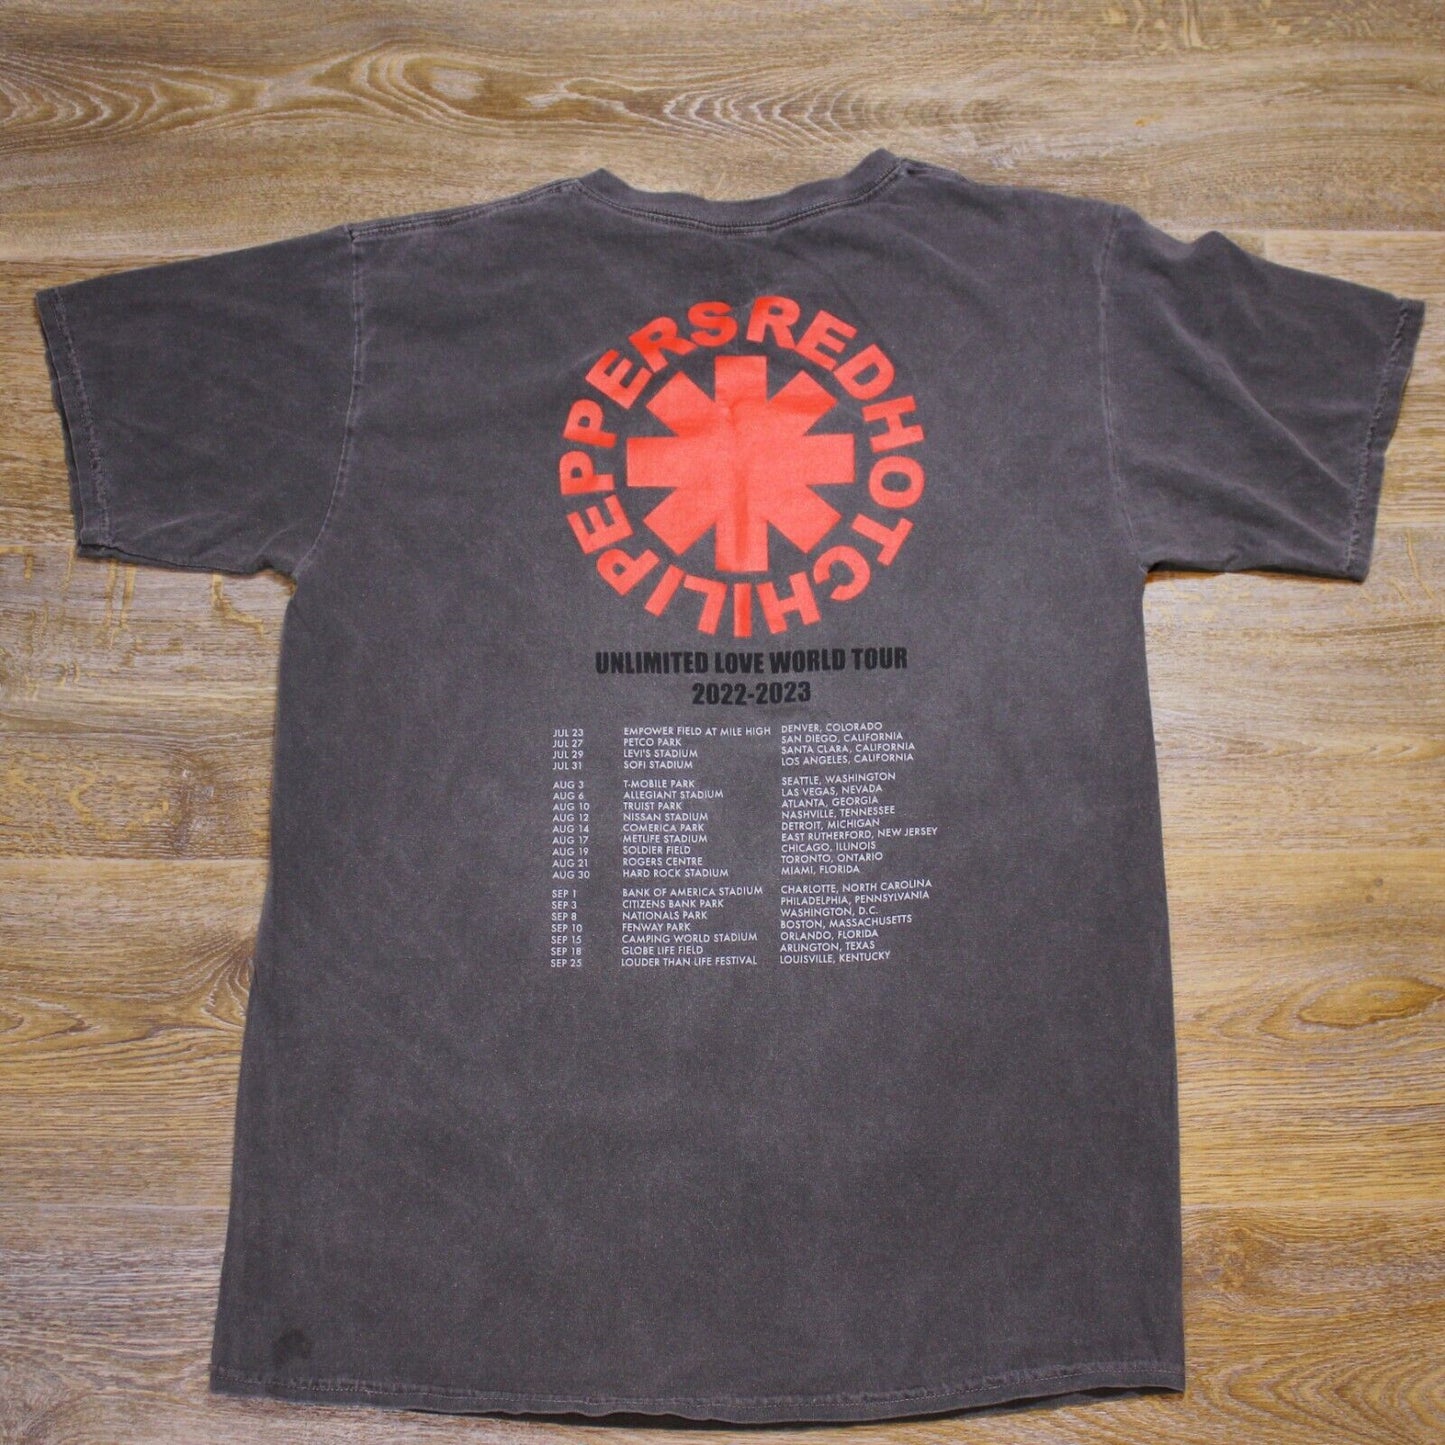 Red Hot Chili Peppers Unlimited Love Tour 2002-2003 Grey Shirt - Men's Medium